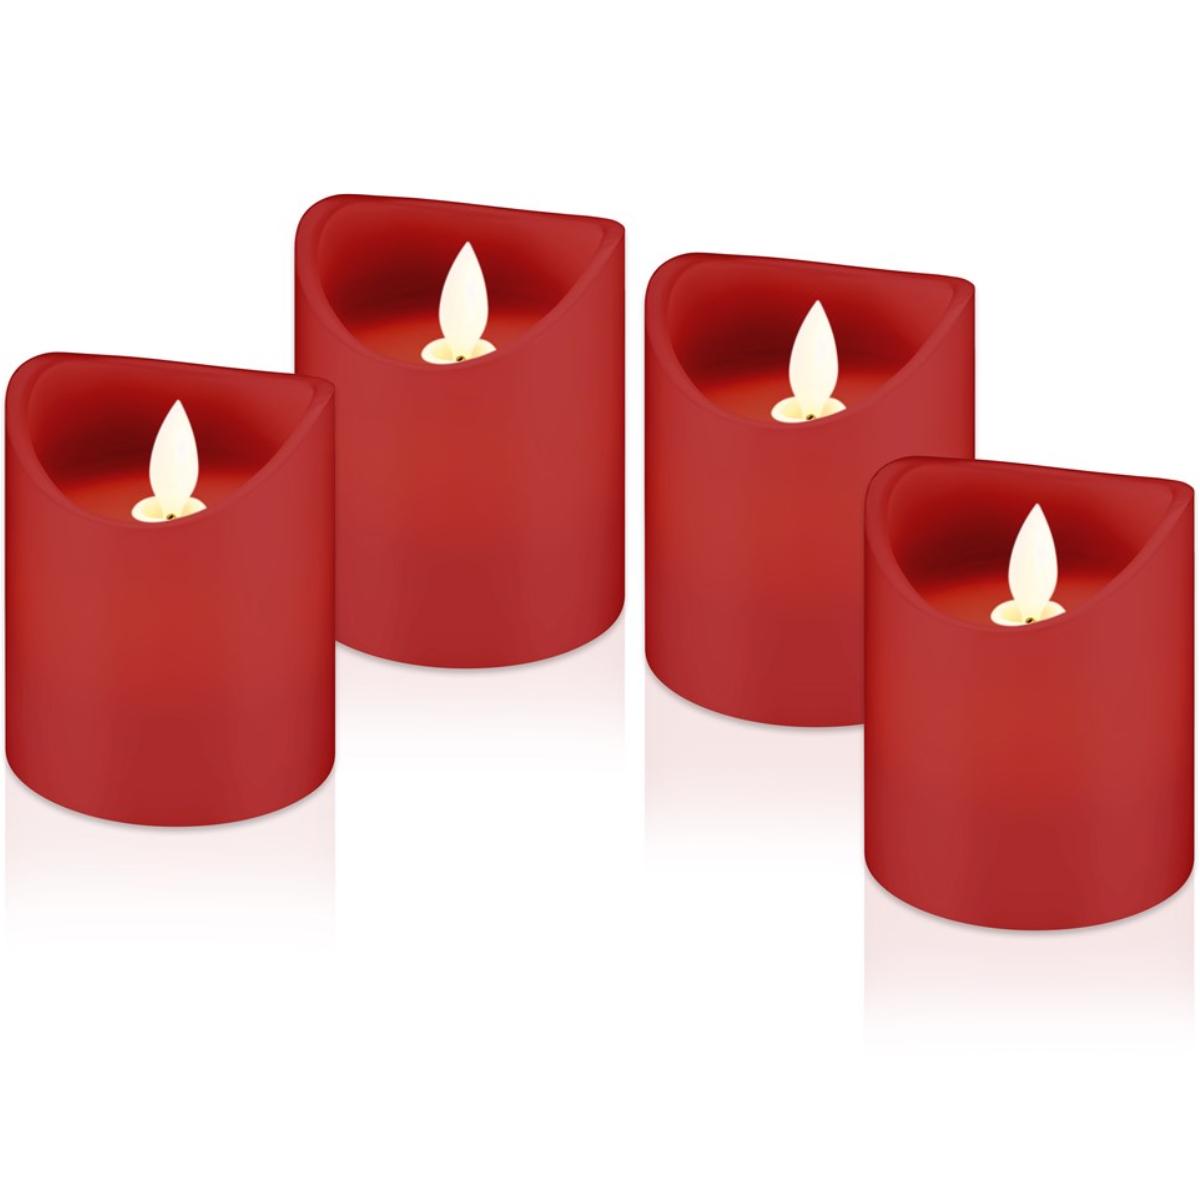 Set of 4 LED real wax candles, red beautiful and safe lighting solution